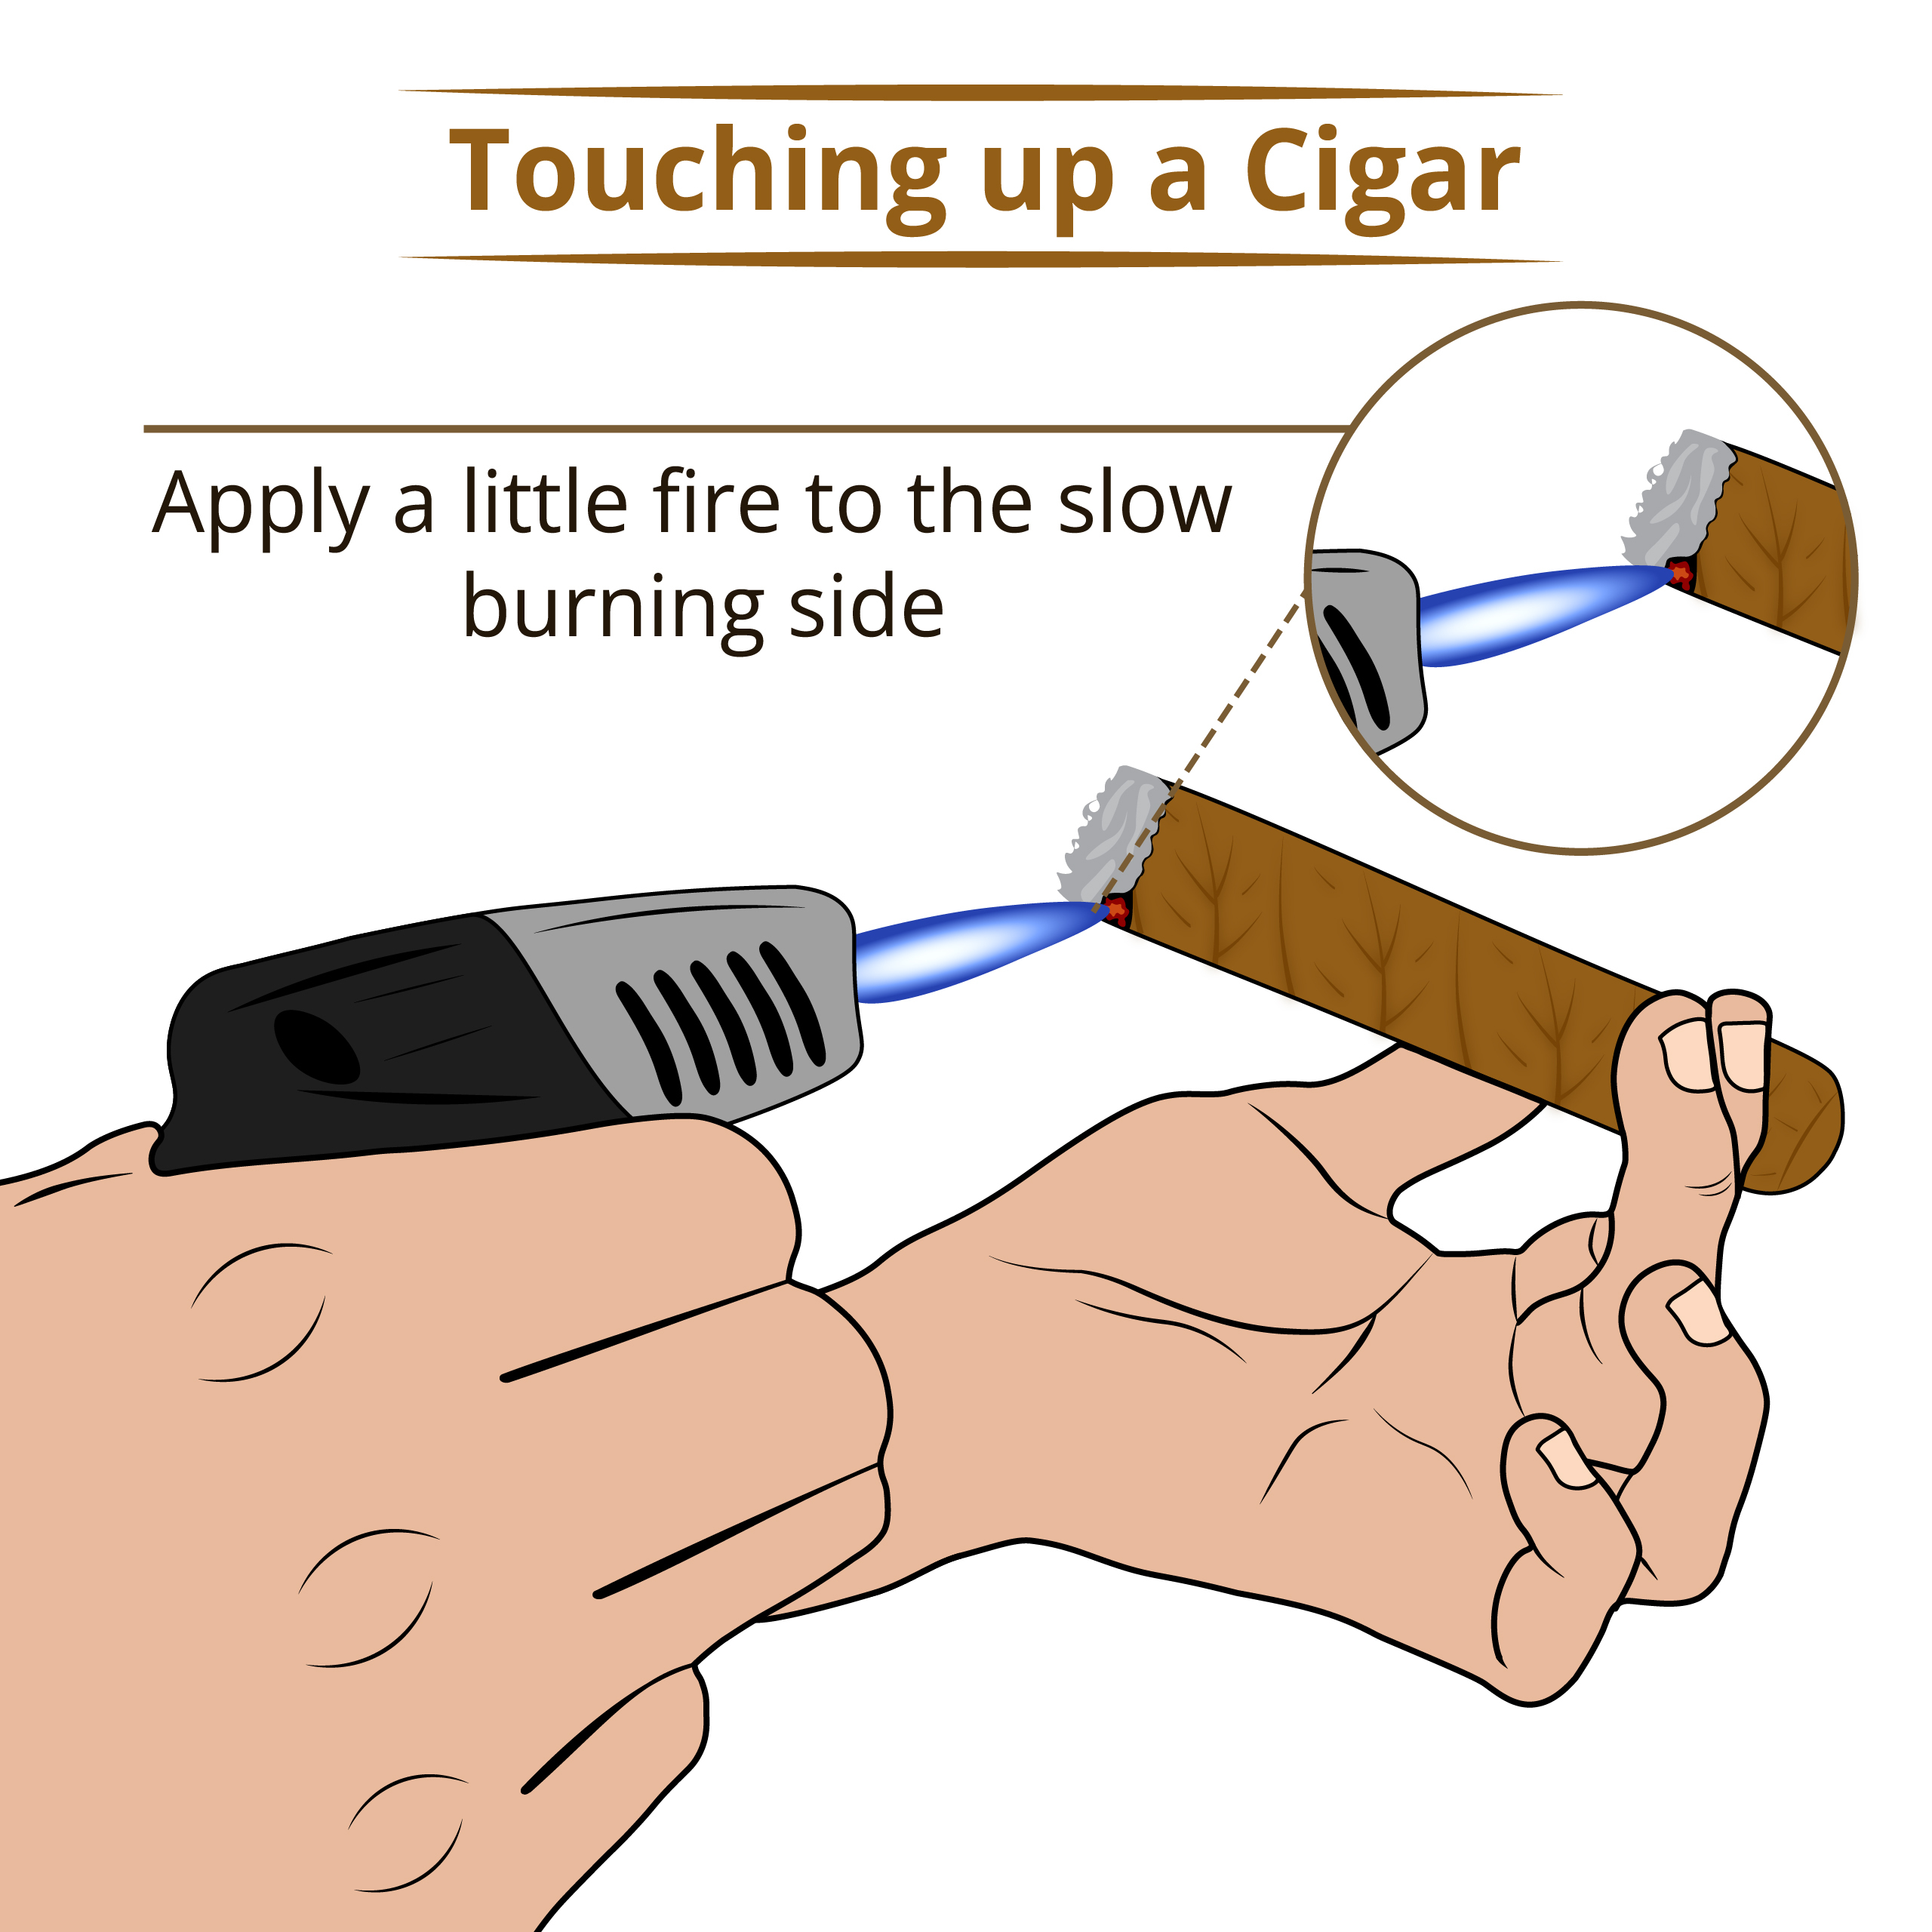 How to touch up a cigar properly